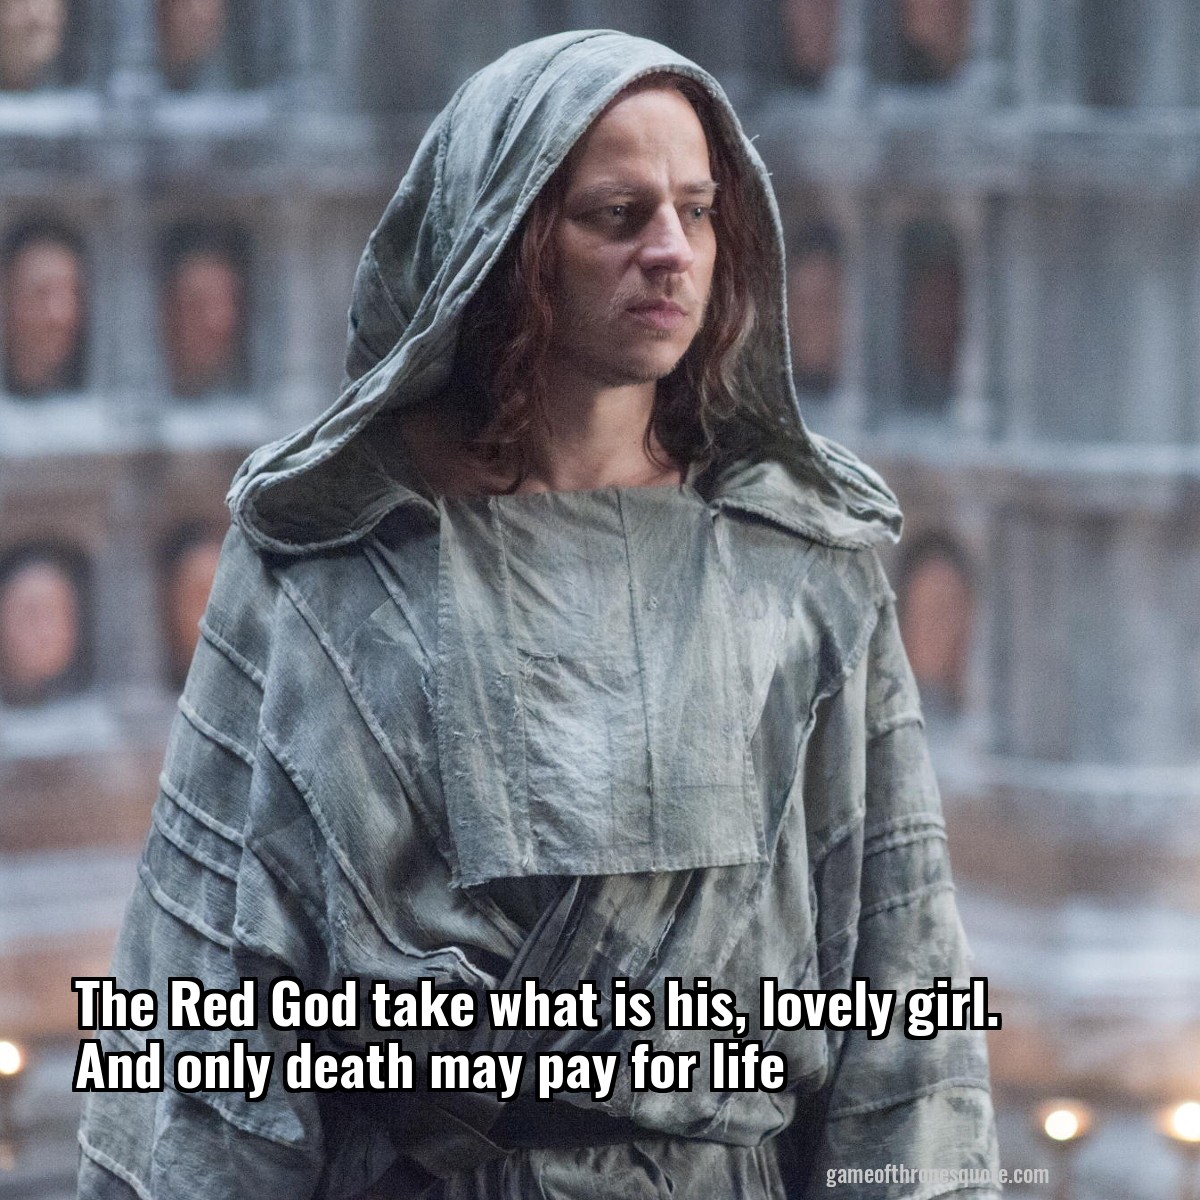 The Red God take what is his, lovely girl. And only death may pay for life